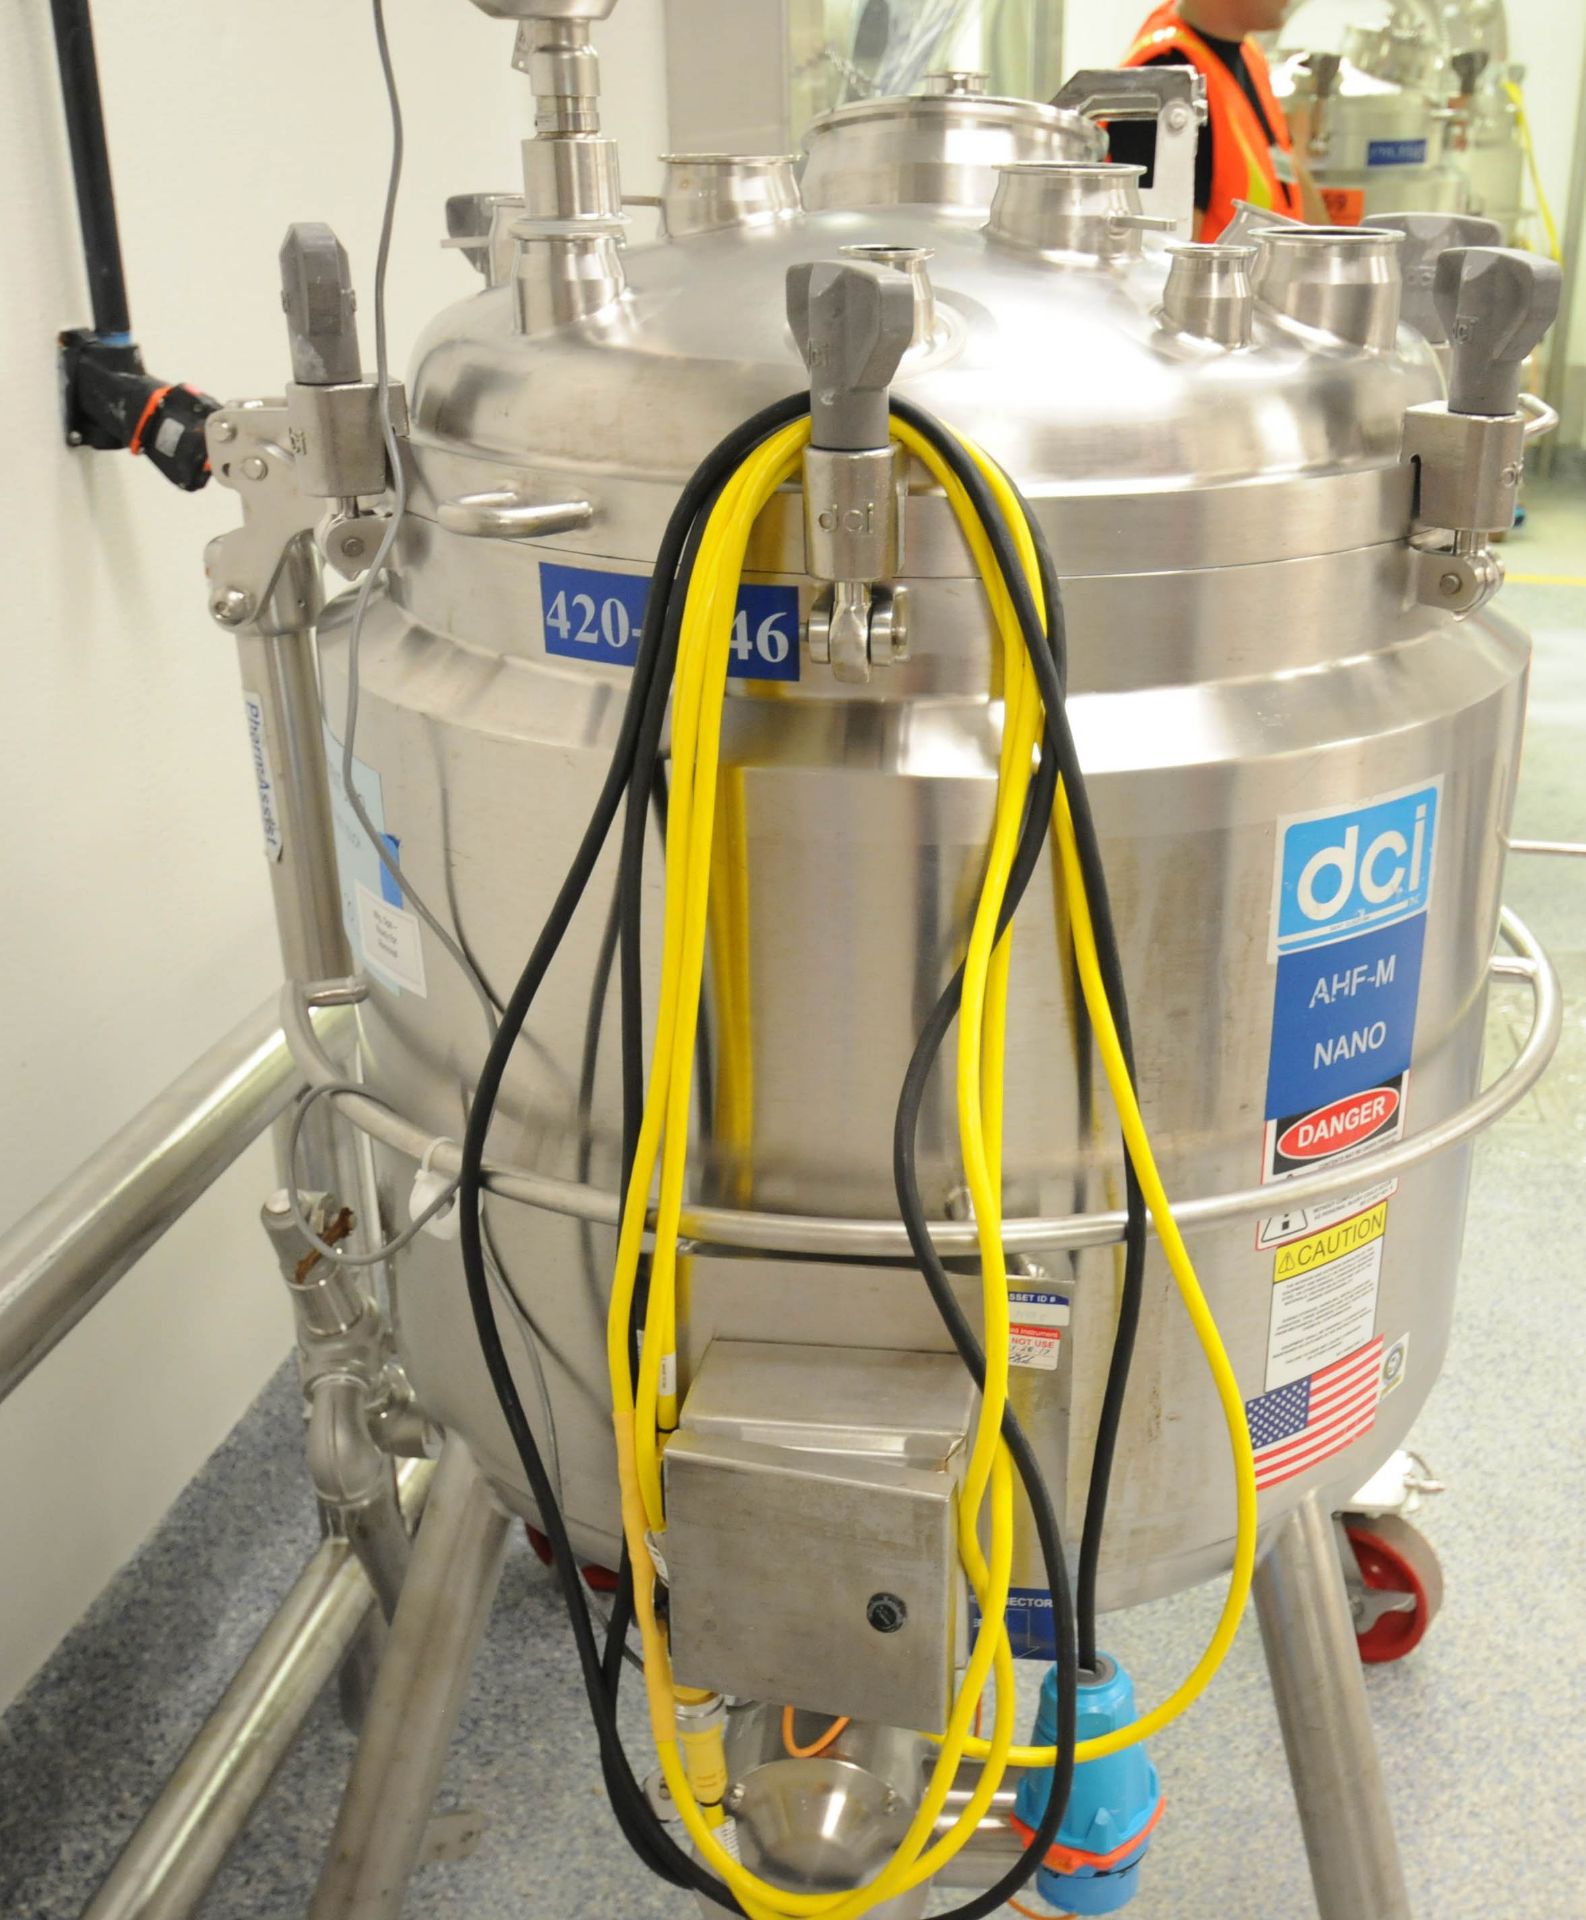 DCI (2009) AHF-M NANO PORTABLE JACKETED STAINLESS STEEL REACTOR VESSEL WITH 200 LITER CAPACITY, - Image 6 of 8